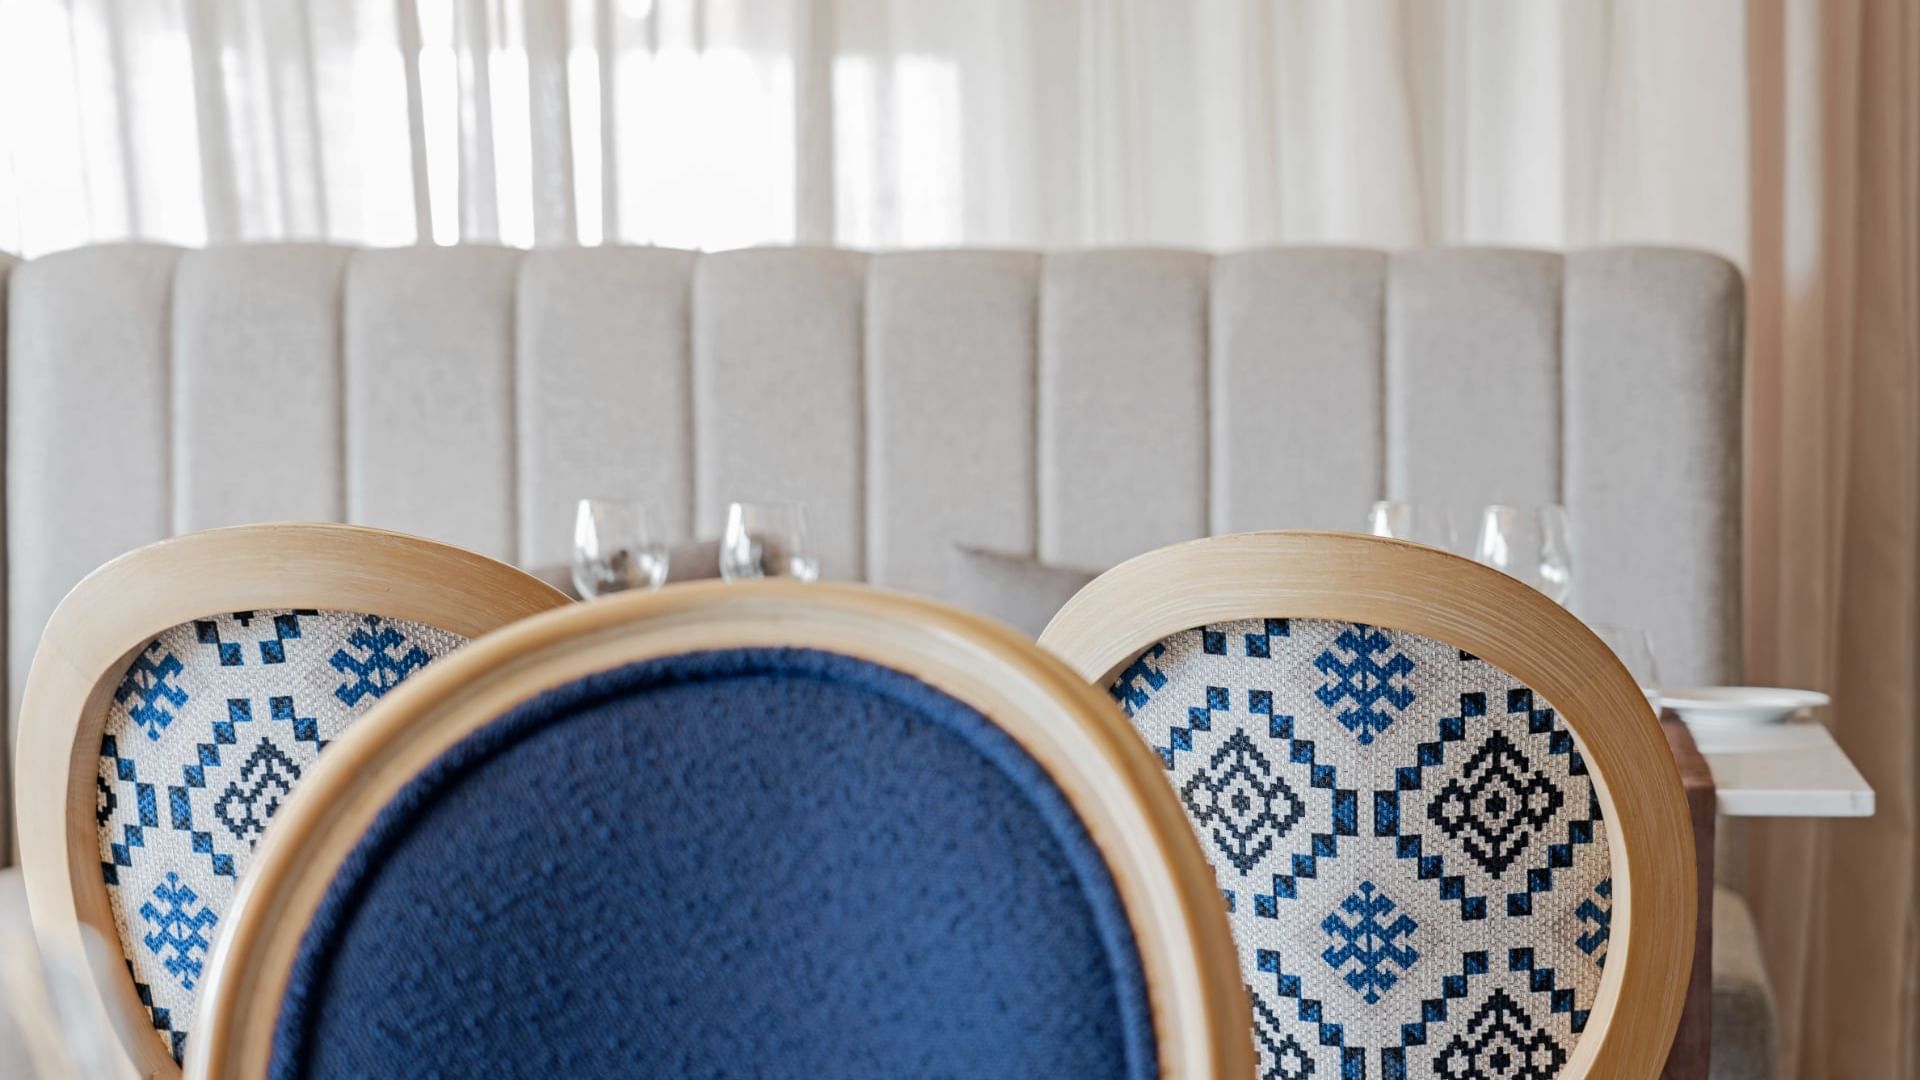 Close-up of Monte Brasil Restaurant's chairs at Bensaude Hotels